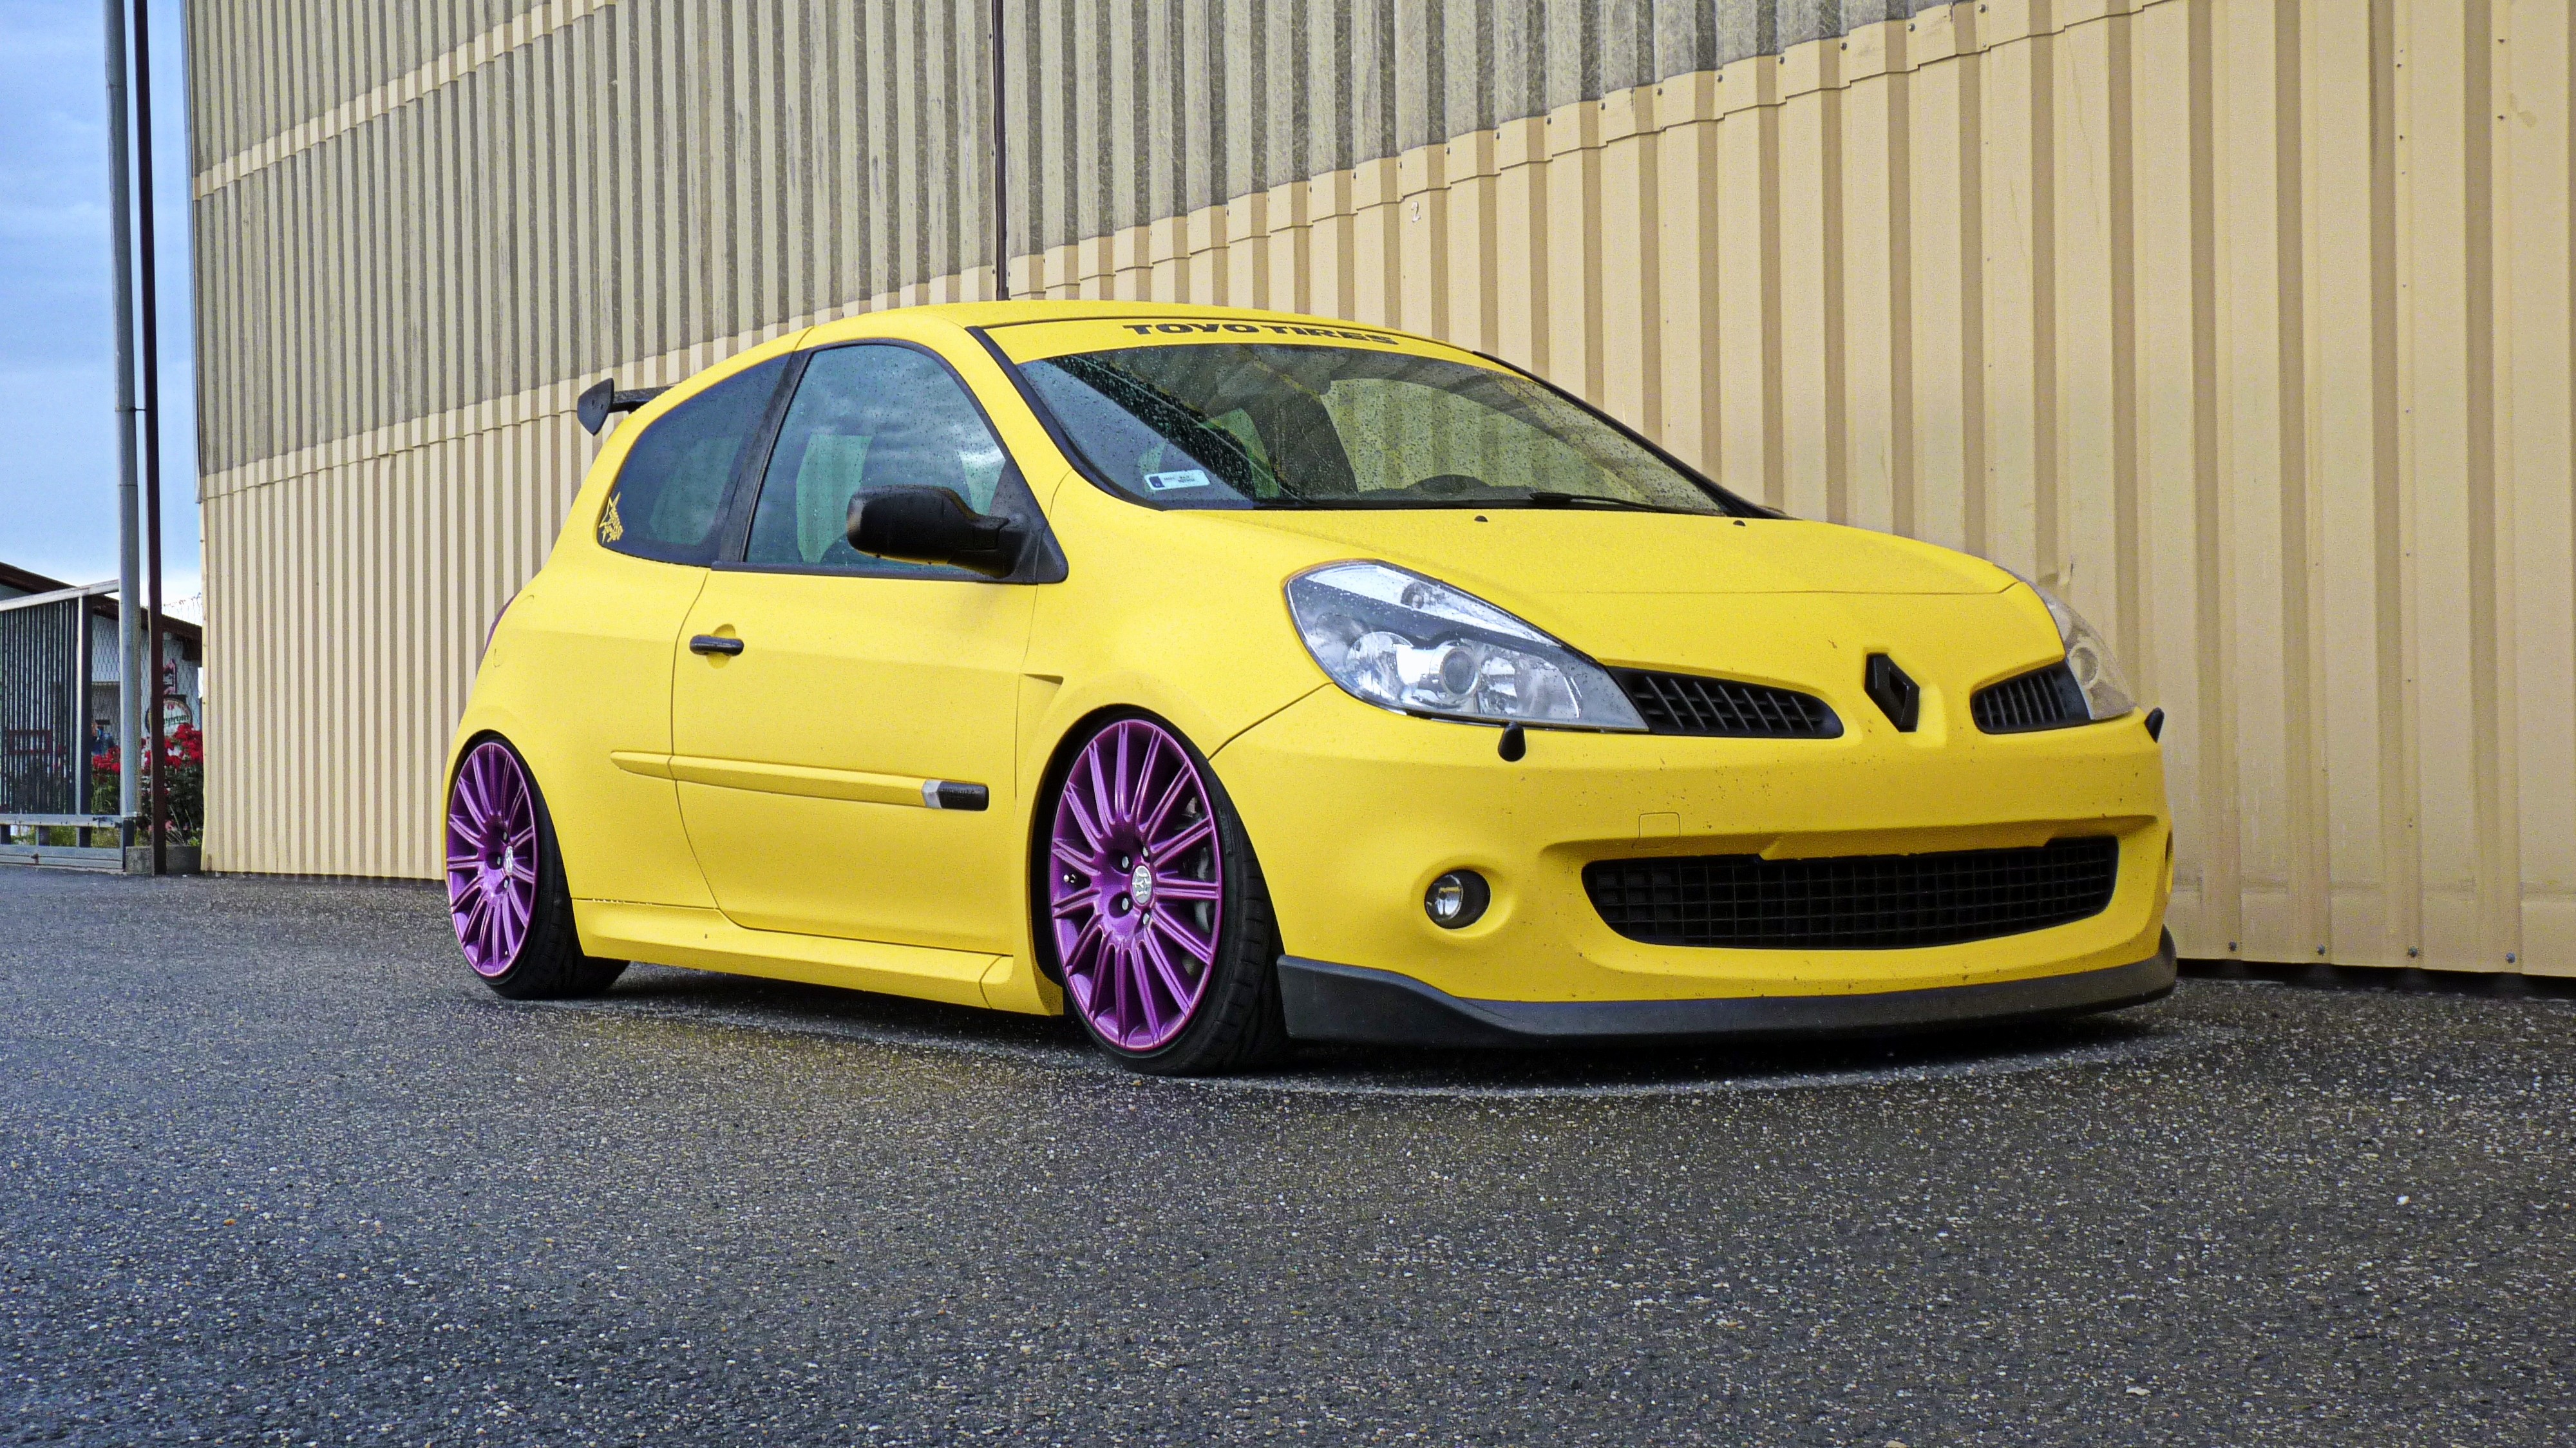 Renault Renault Clio Stance Car Vehicle Tuning Colored Wheels 4000x2248